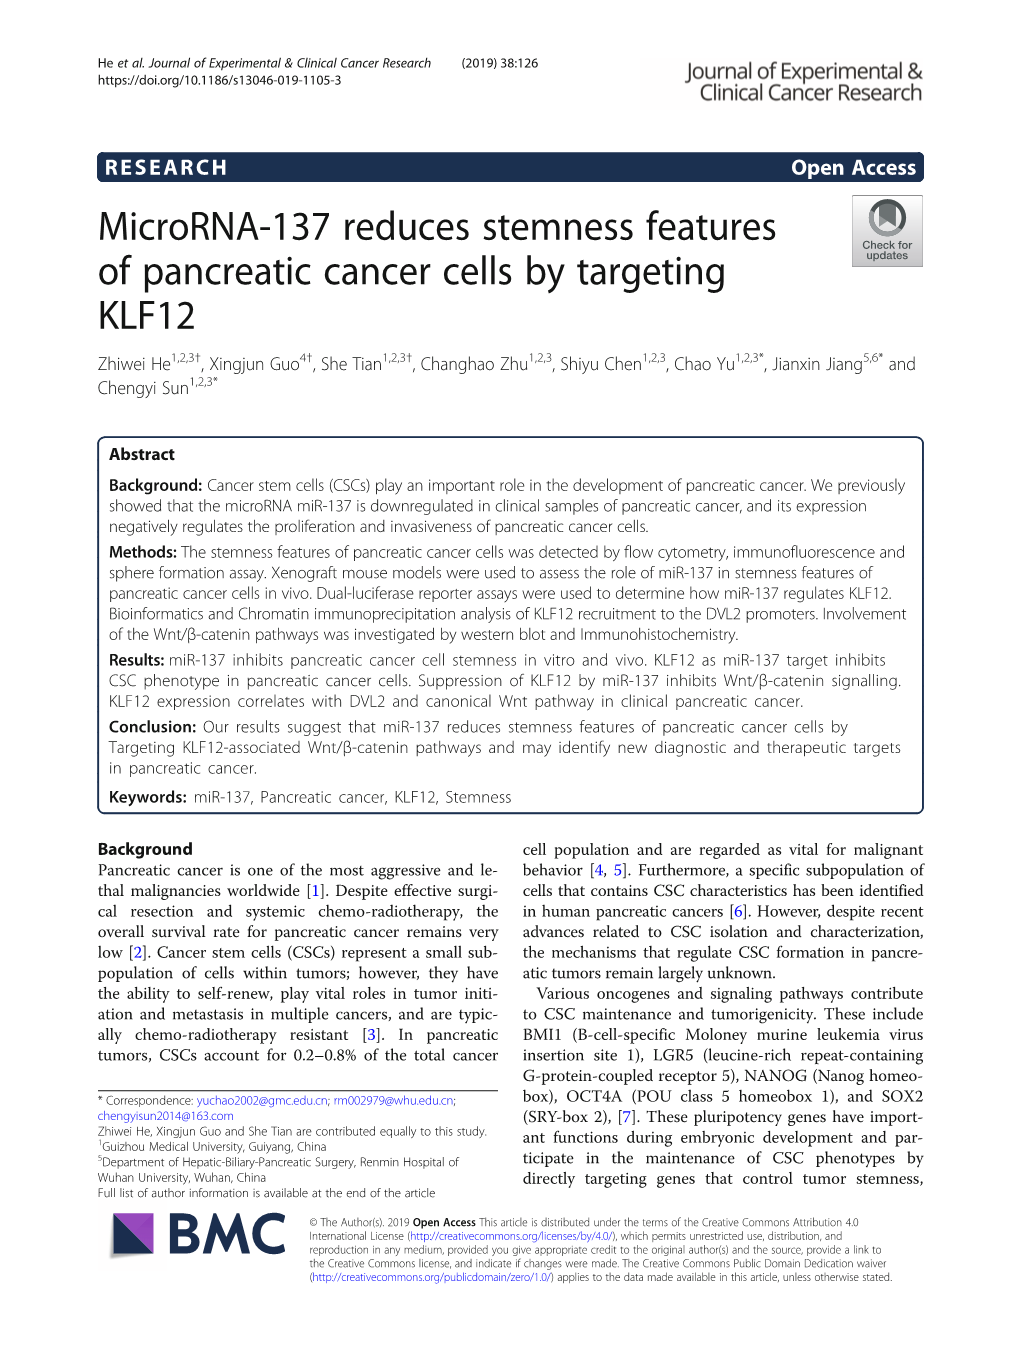 Microrna-137 Reduces Stemness Features of Pancreatic Cancer Cells